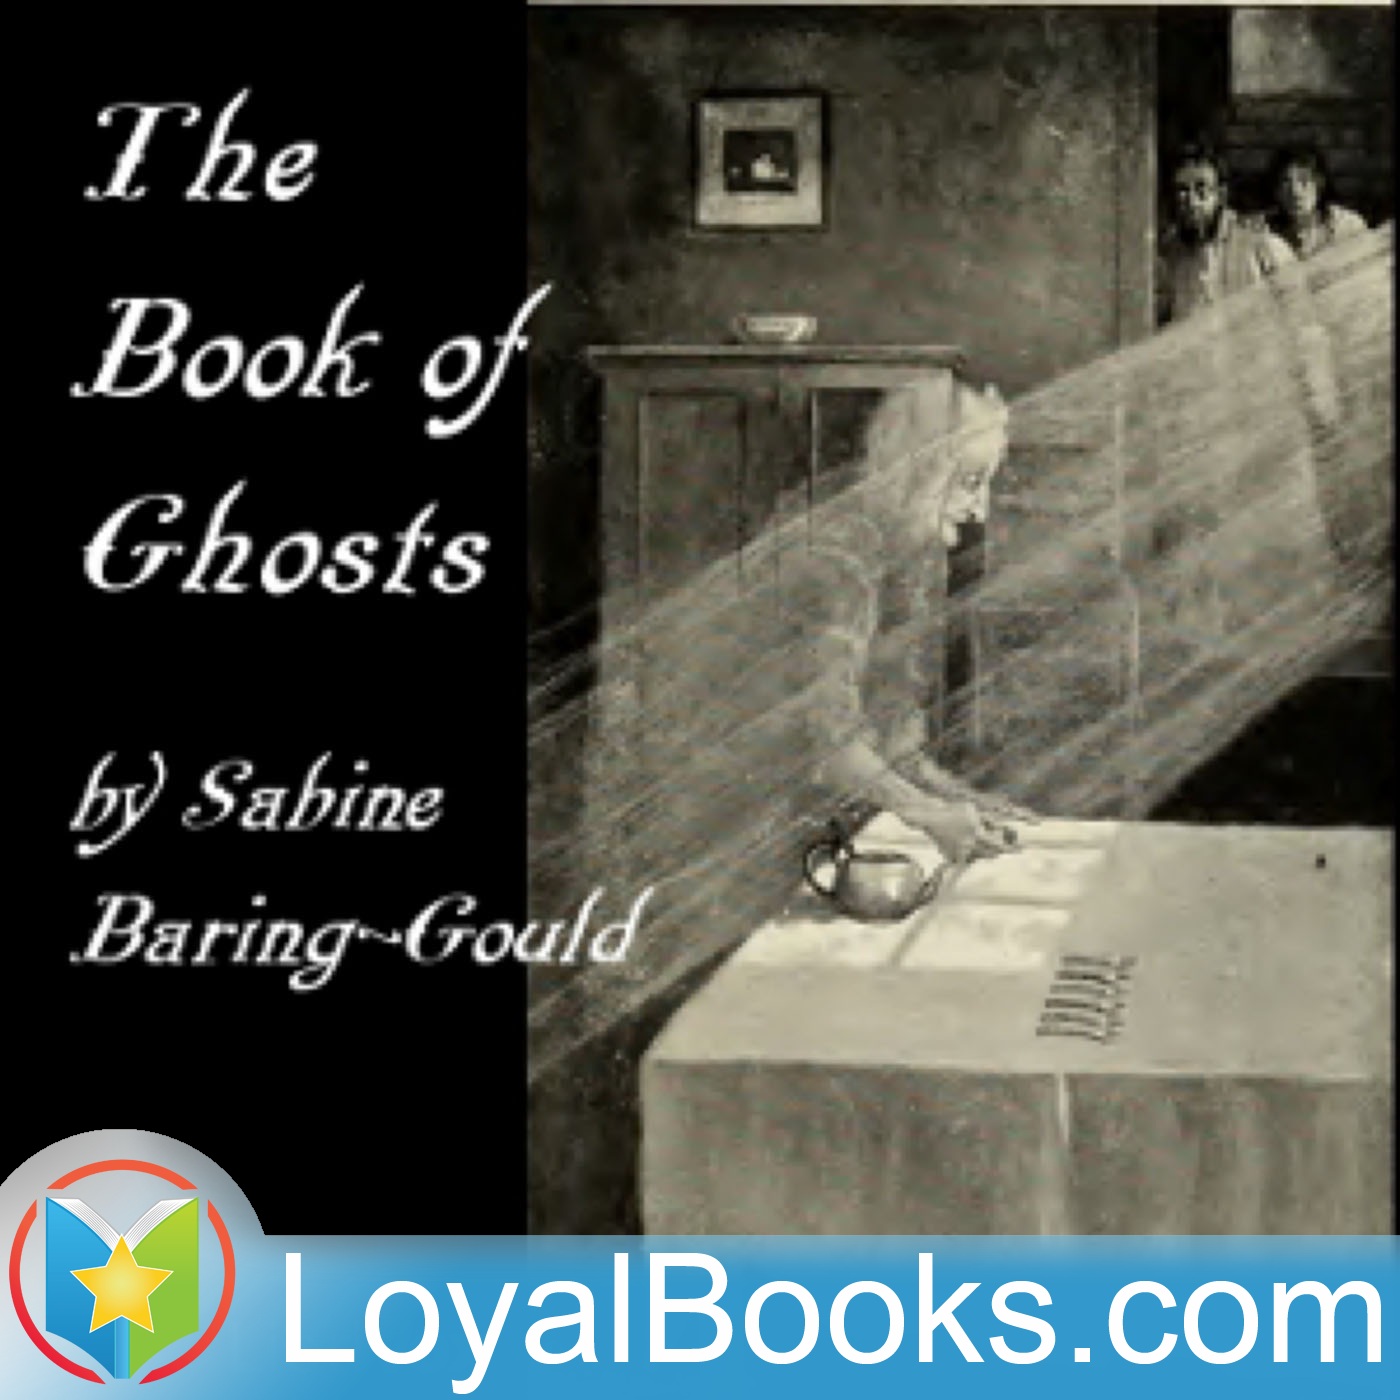 The Book of Ghosts by S. Baring-Gould